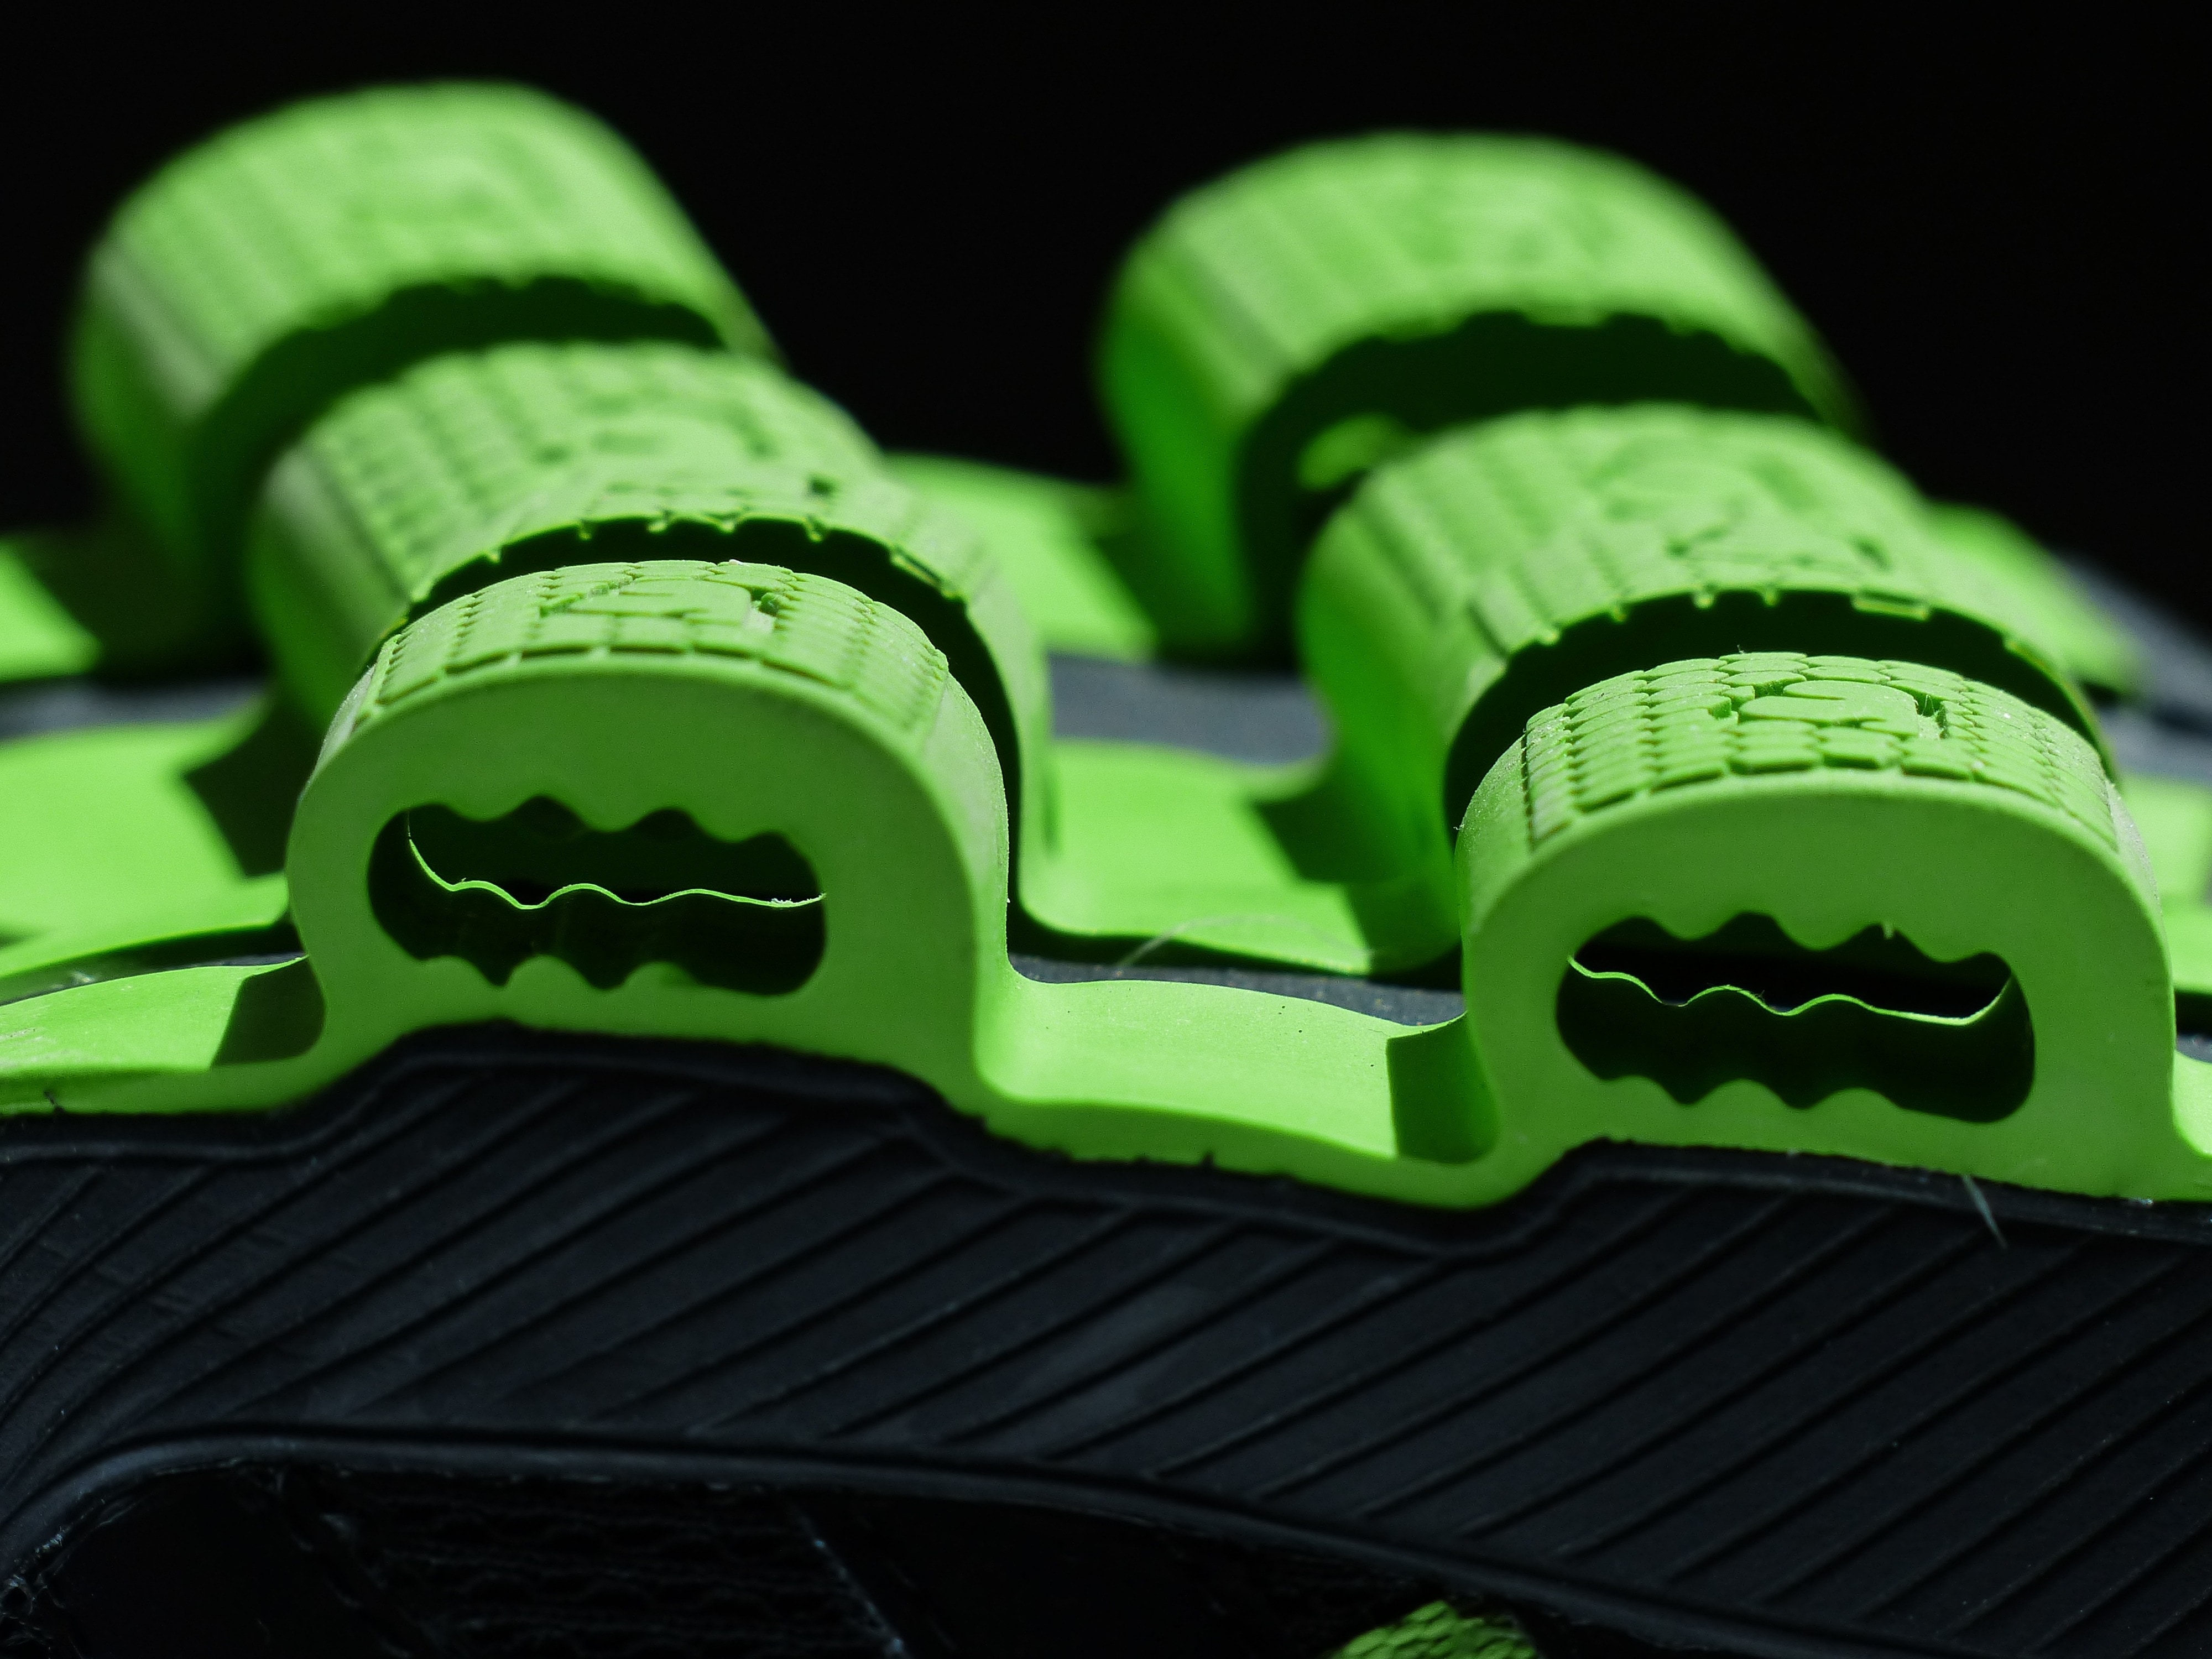 Green, Suspension, Sole, Rubber Lining, green color, no people